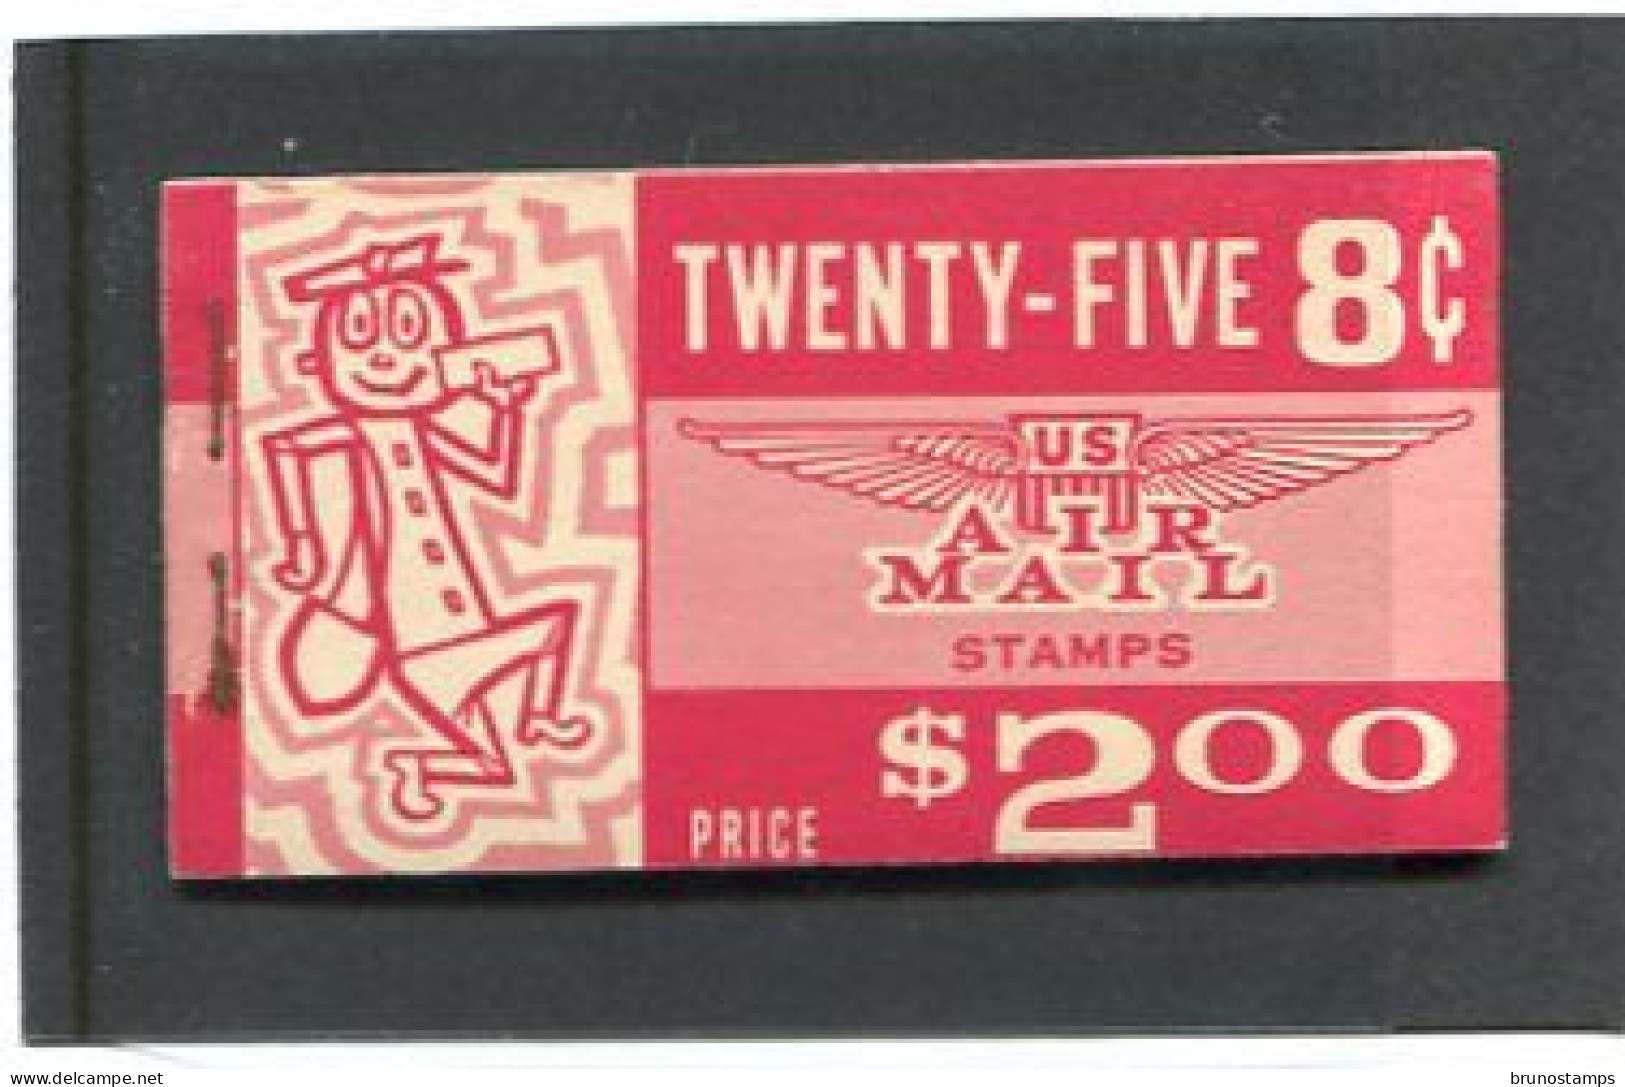 UNITED STATES/USA - 1963  2$  MR ZIP  BOOKLET  MINT NH - 1941-80